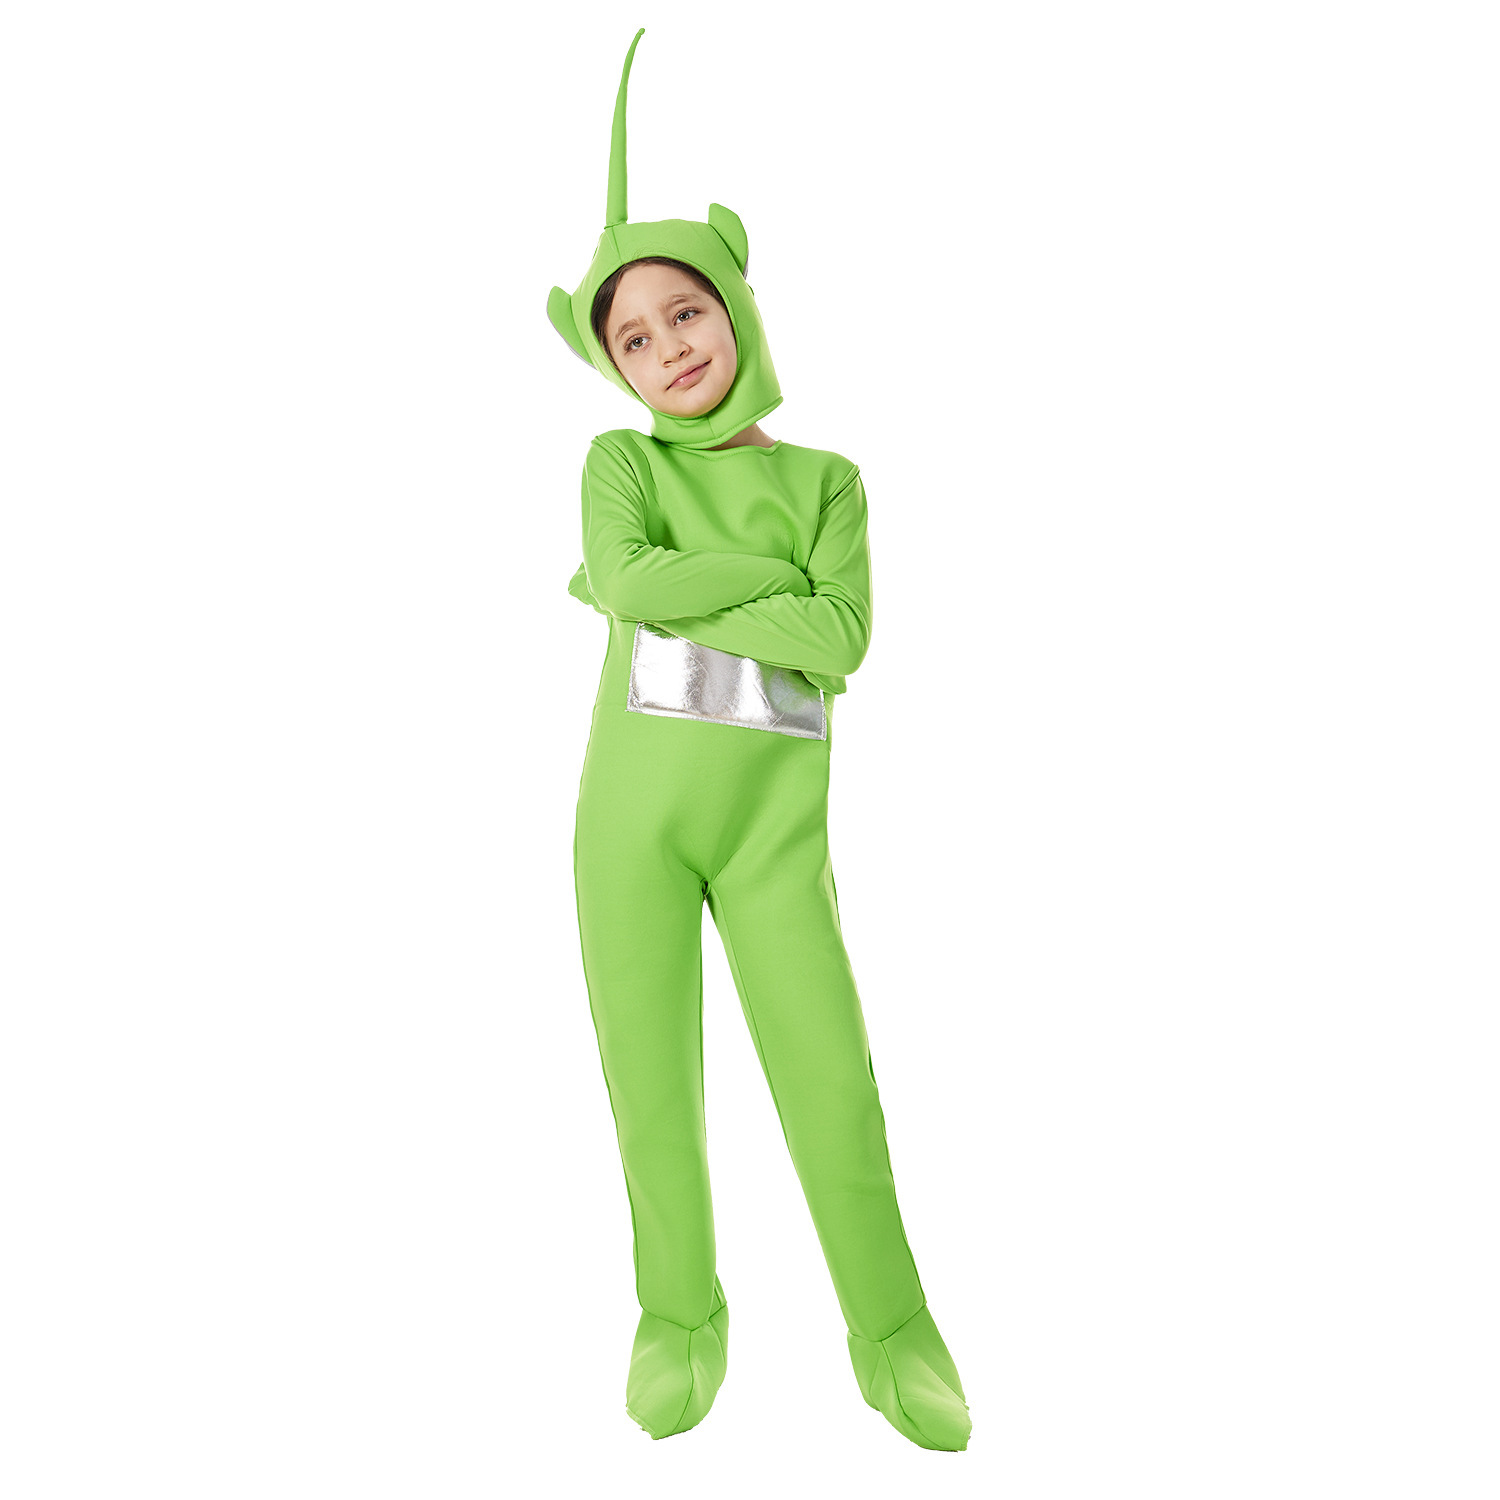 Teletubbies Cosplay for Adult Funny Anime 2022 Summer Home 4 Colors Dipsy  Soft | eBay